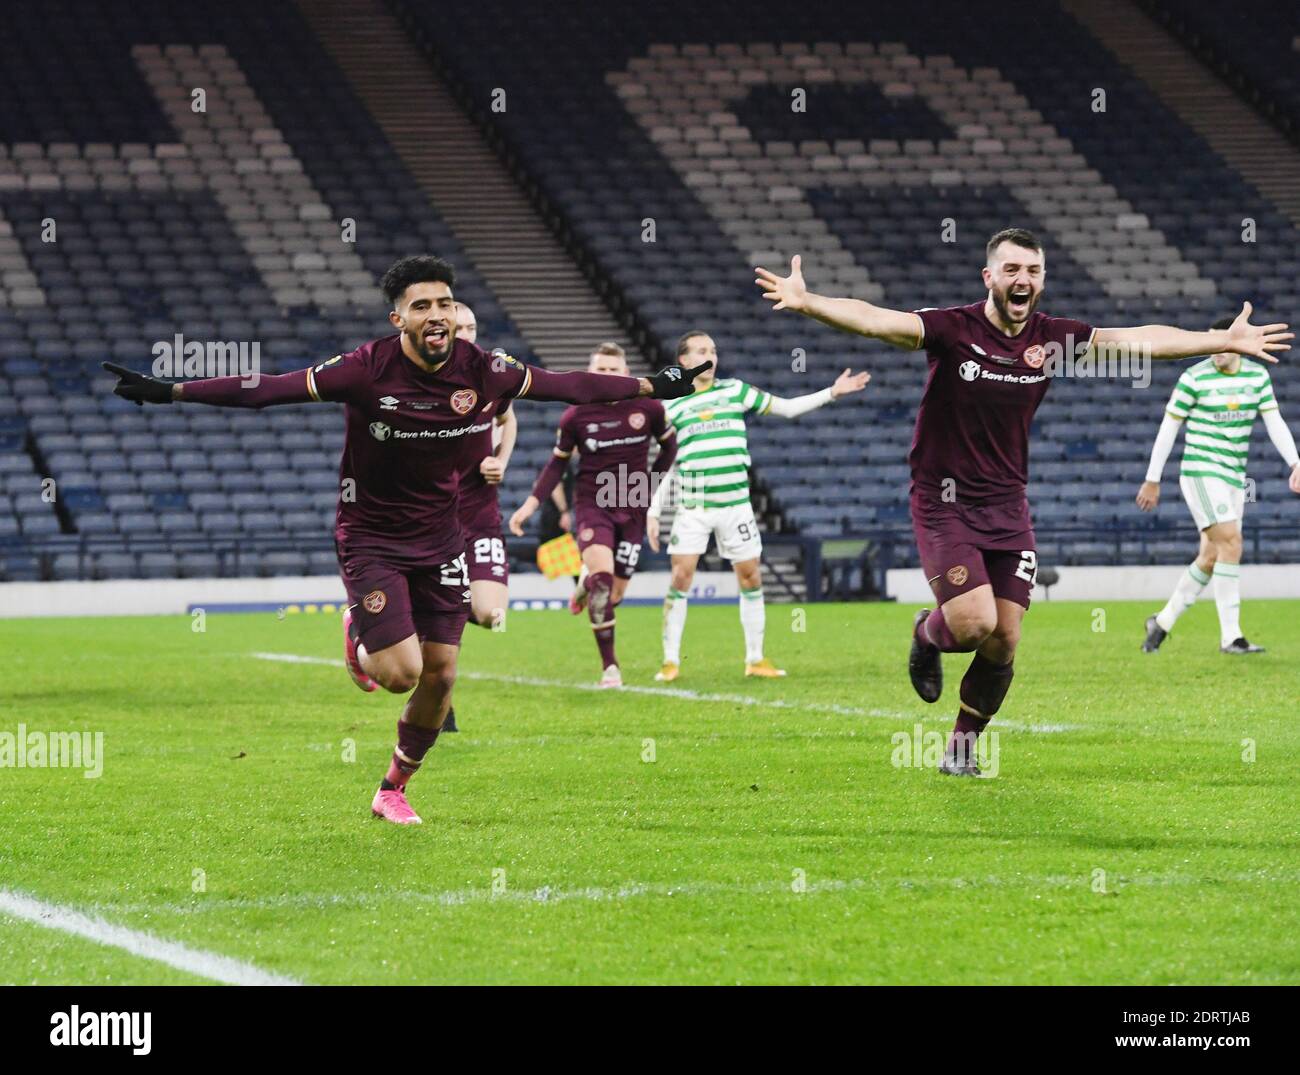 Hampden Park, Glasgow, Scotland, UK.  20th December, 2020. William Hill Scottish Cup Final 2019-20.  Pic shows Hearts Josh Ginnelly (L) celebrating his equalising goal in the 3-3 draw AET 4-3 with Craig Halkett Credit: eric mccowat/Alamy Live News Stock Photo